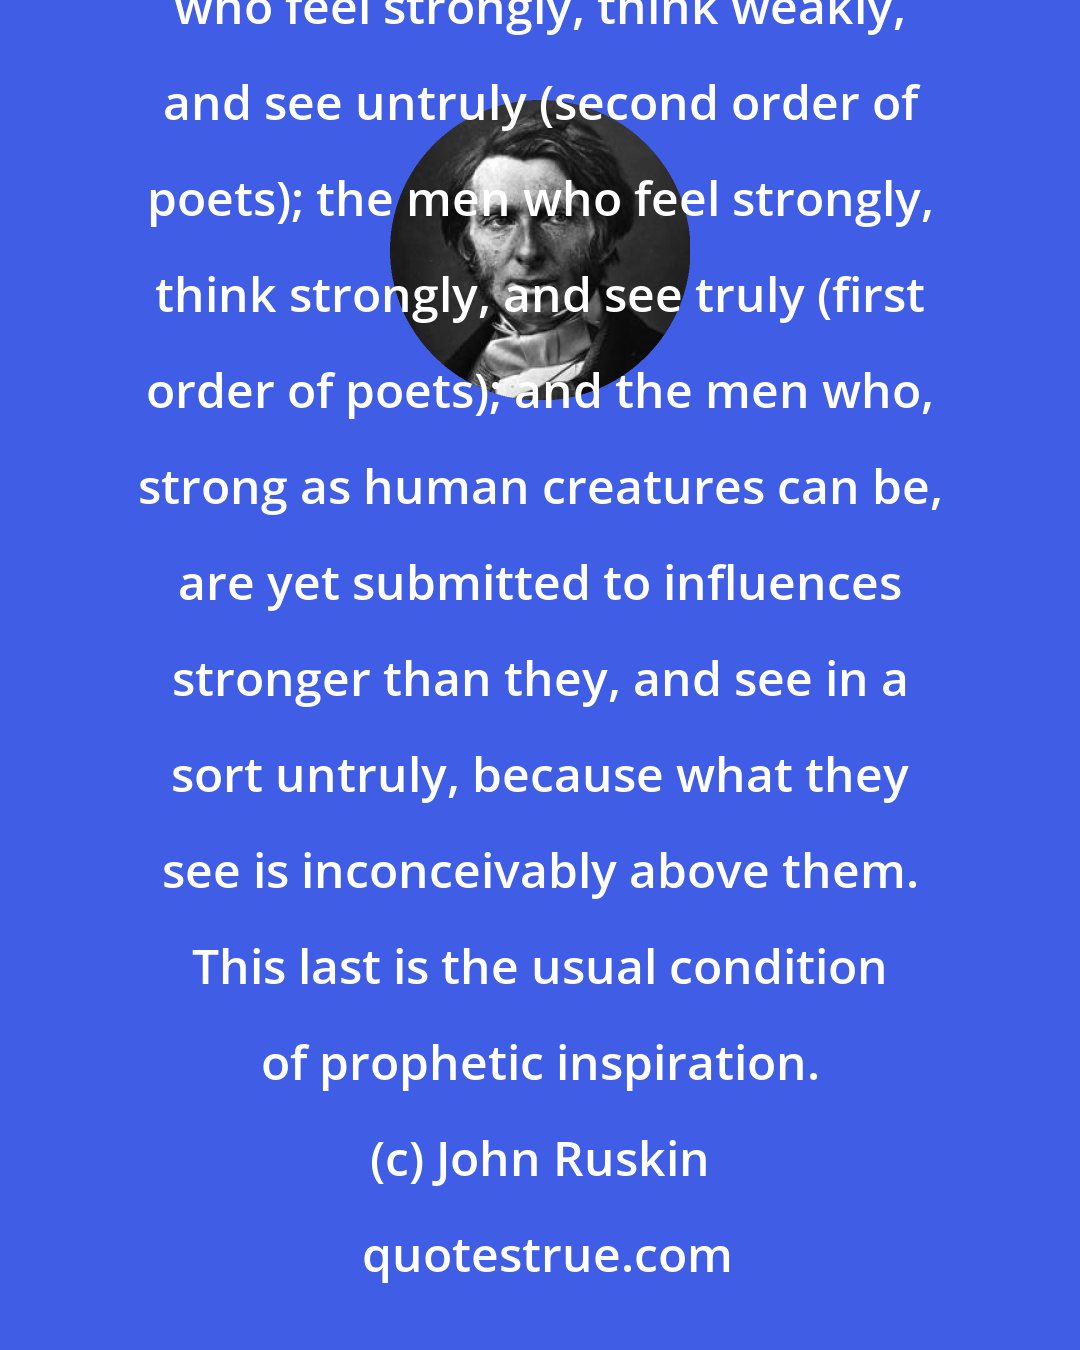 John Ruskin: And thus, in full, there are four classes: the men who feel nothing, and therefore see truly; the men who feel strongly, think weakly, and see untruly (second order of poets); the men who feel strongly, think strongly, and see truly (first order of poets); and the men who, strong as human creatures can be, are yet submitted to influences stronger than they, and see in a sort untruly, because what they see is inconceivably above them. This last is the usual condition of prophetic inspiration.